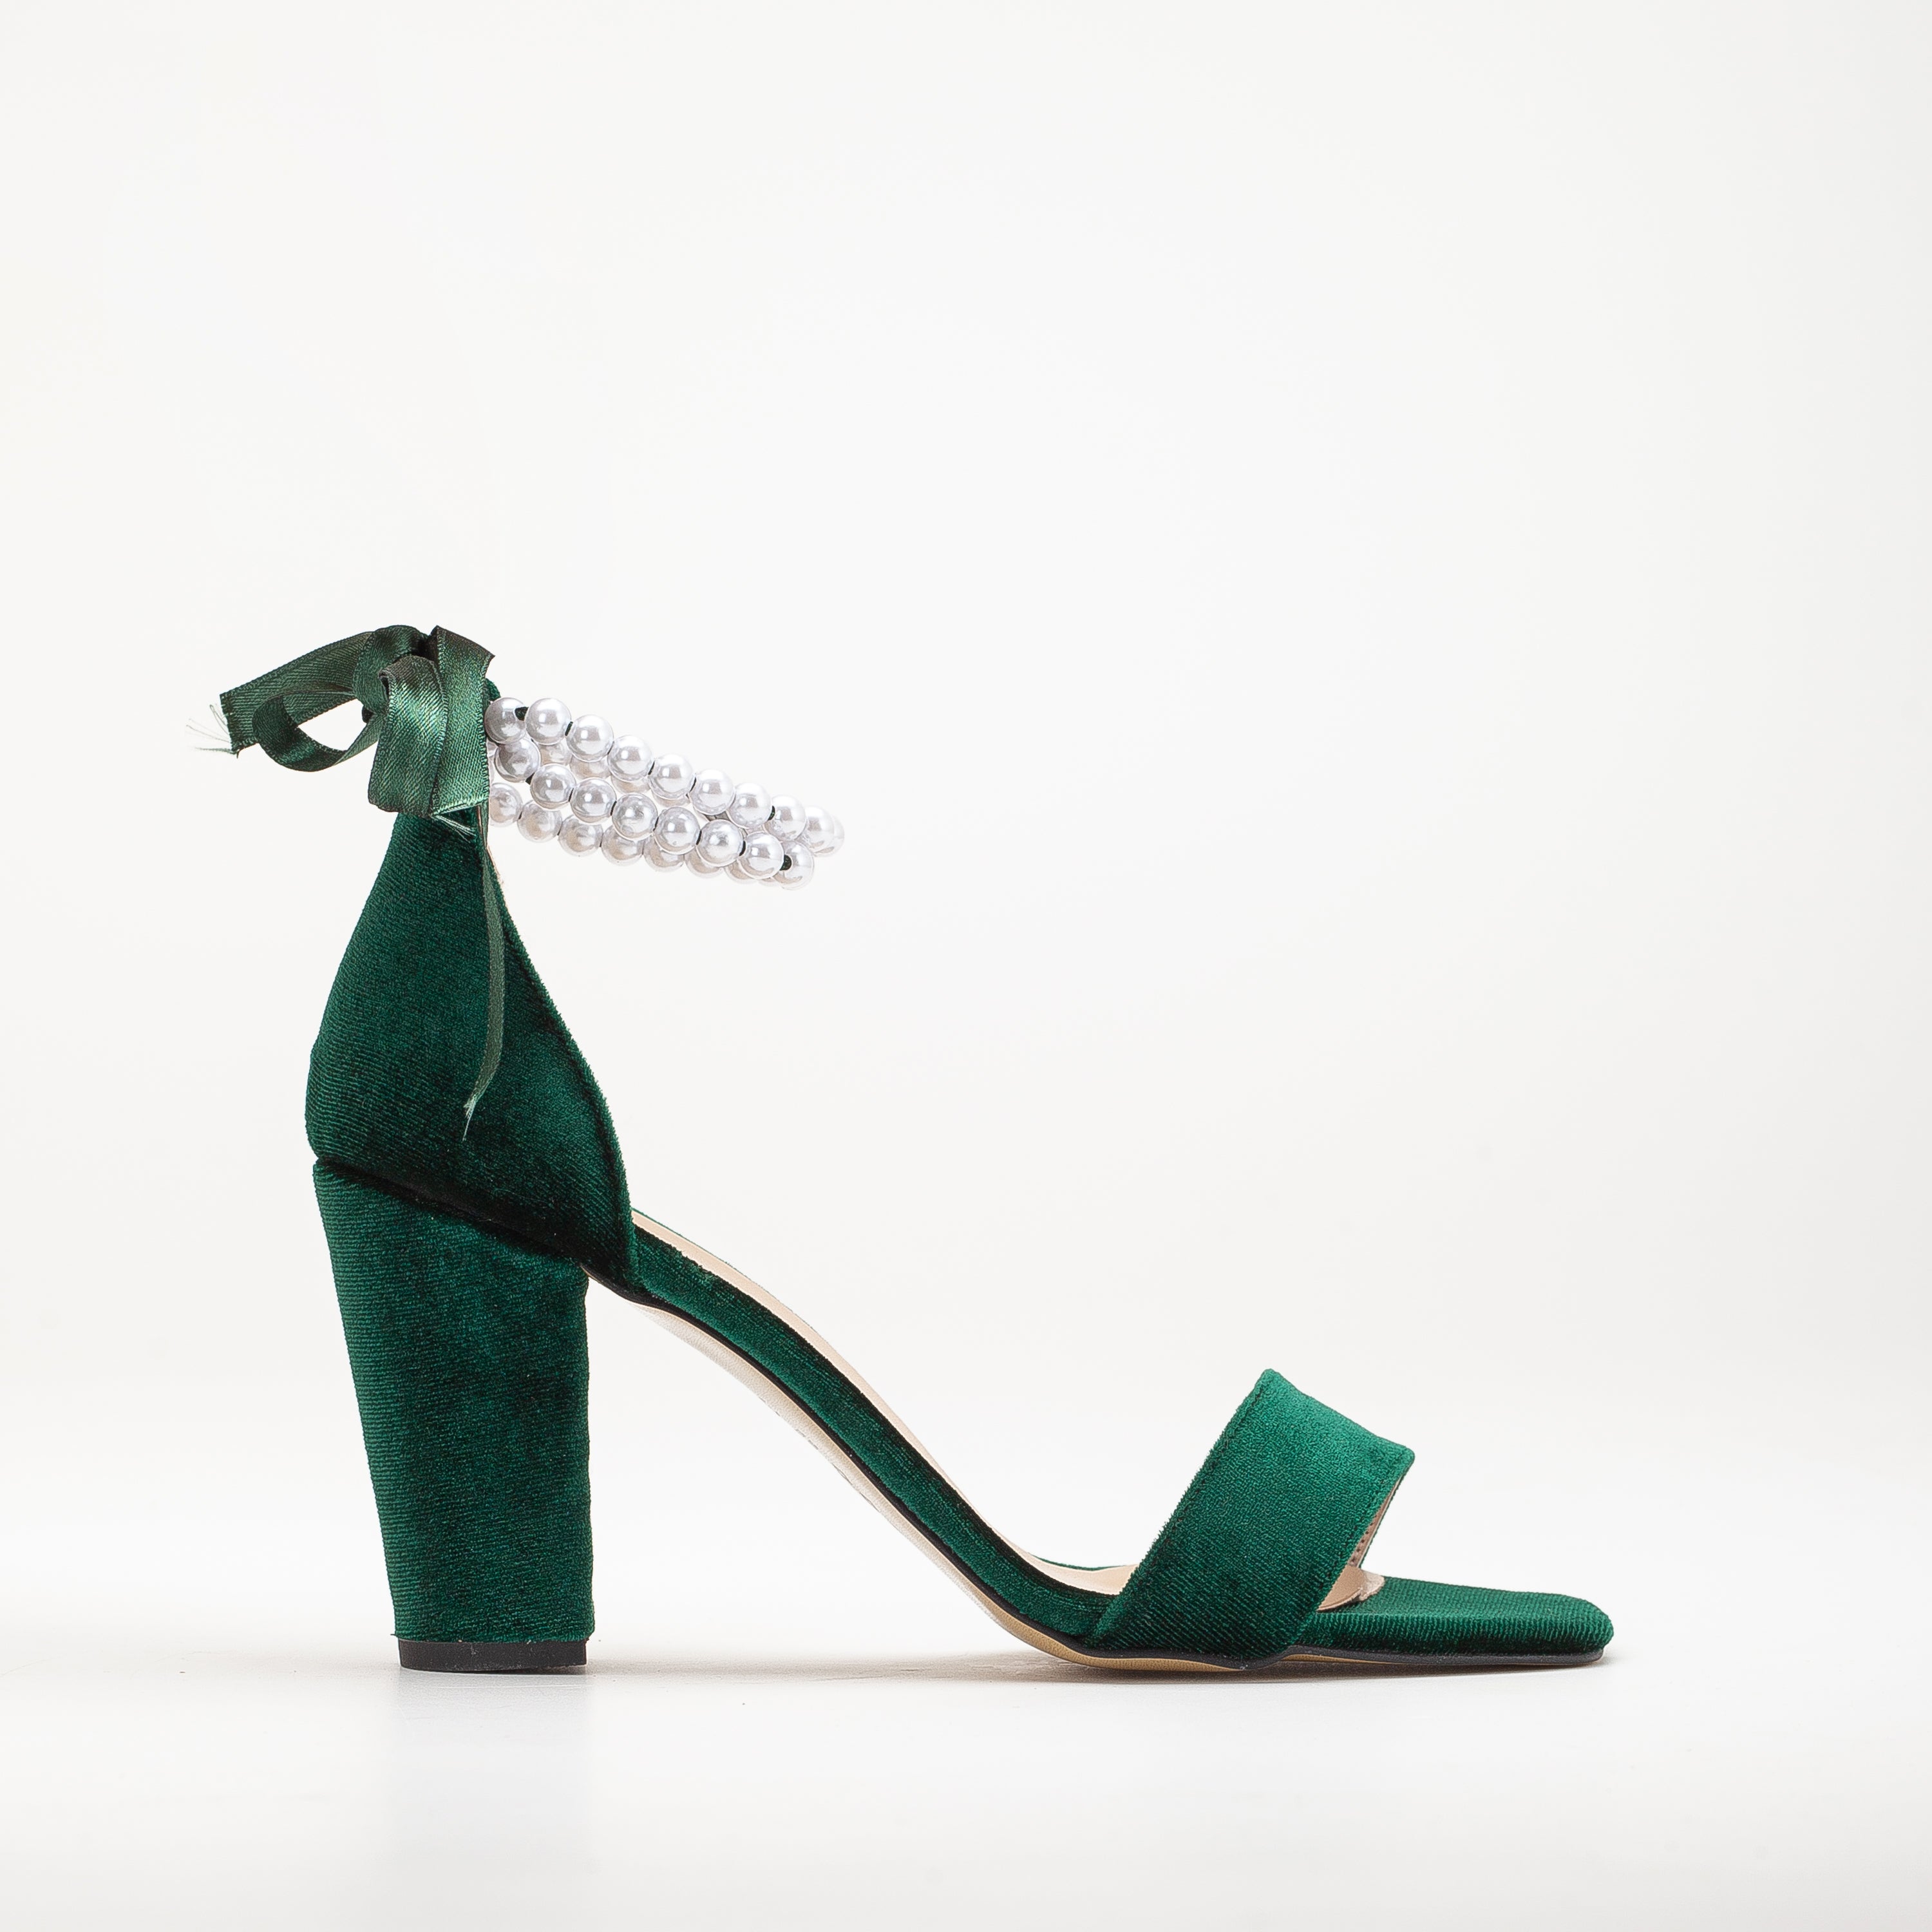 green velvet high heels, open toe shoes, pearl heel detail, women's shoes, elegant footwear, luxury heels, special occasion shoes, stylish sandals, fashion shoes, party shoes